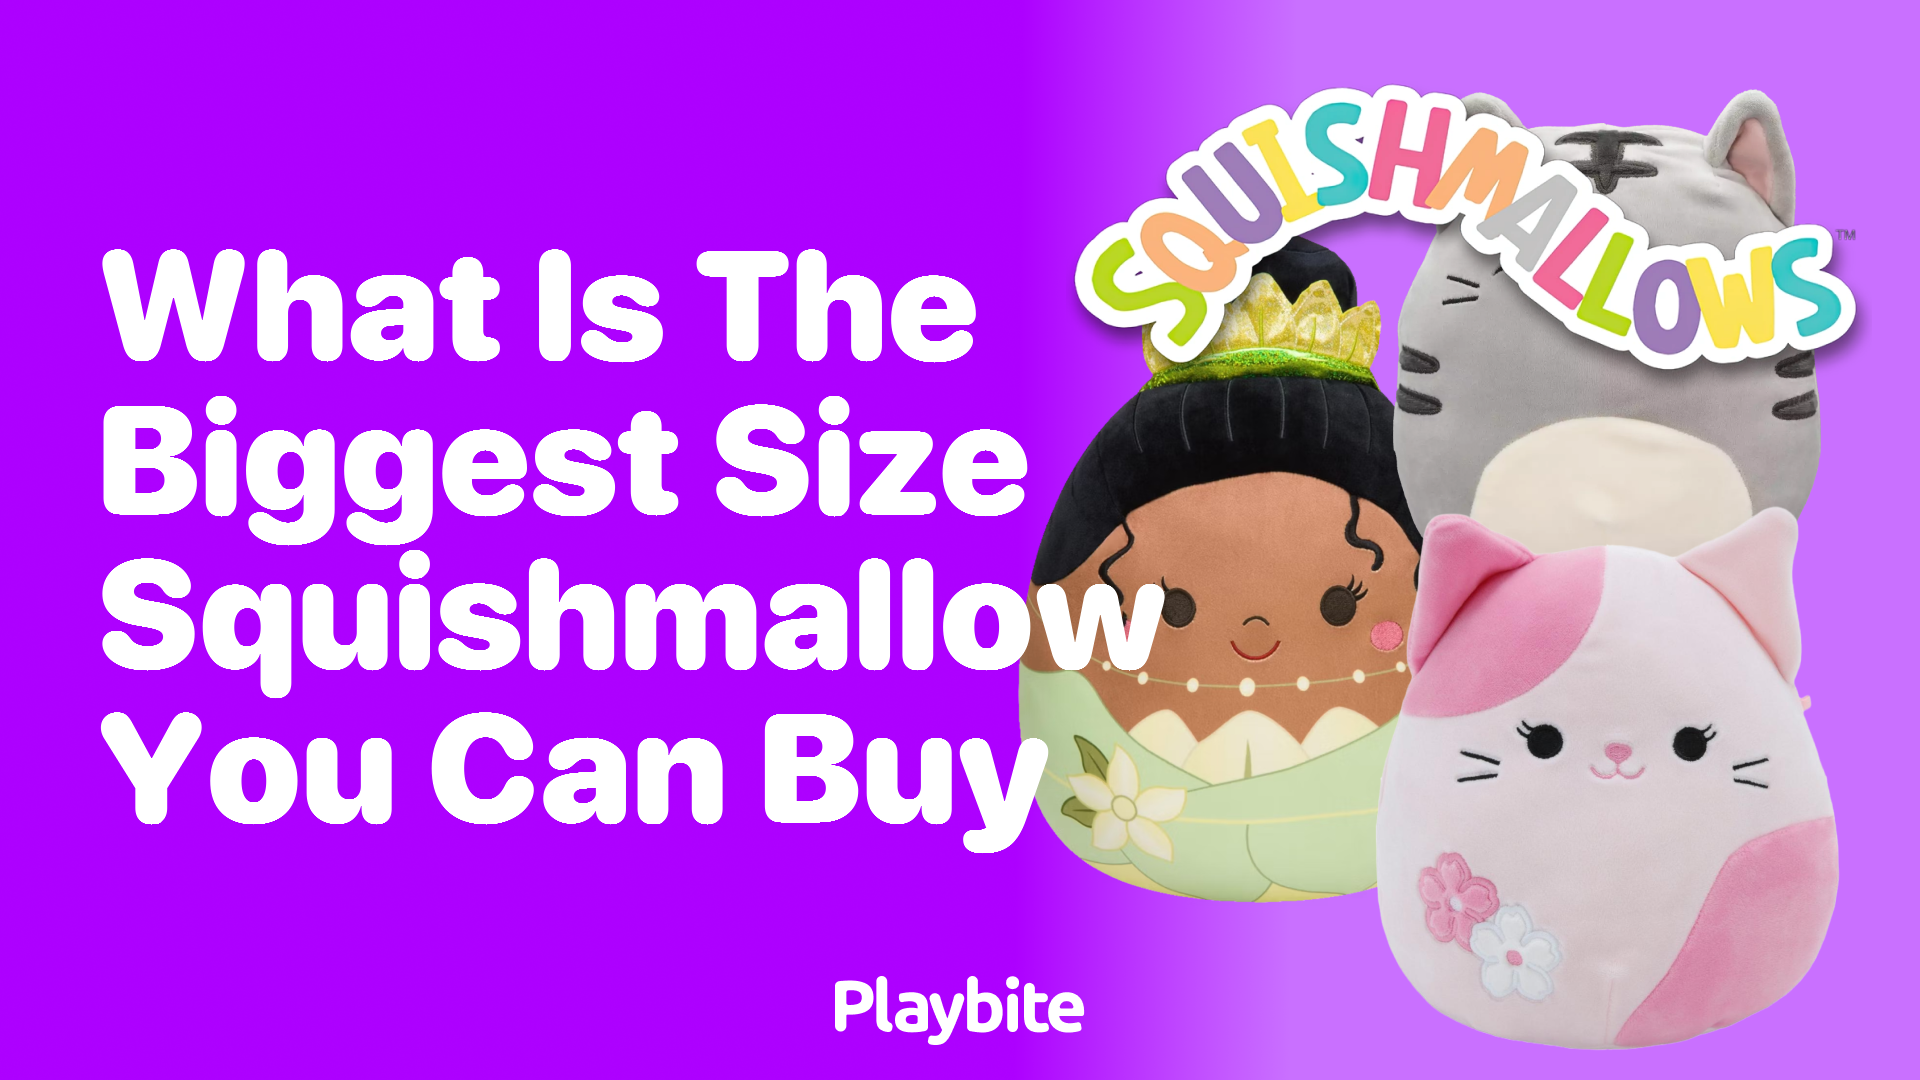 What is the Biggest Size Squishmallow You Can Buy?